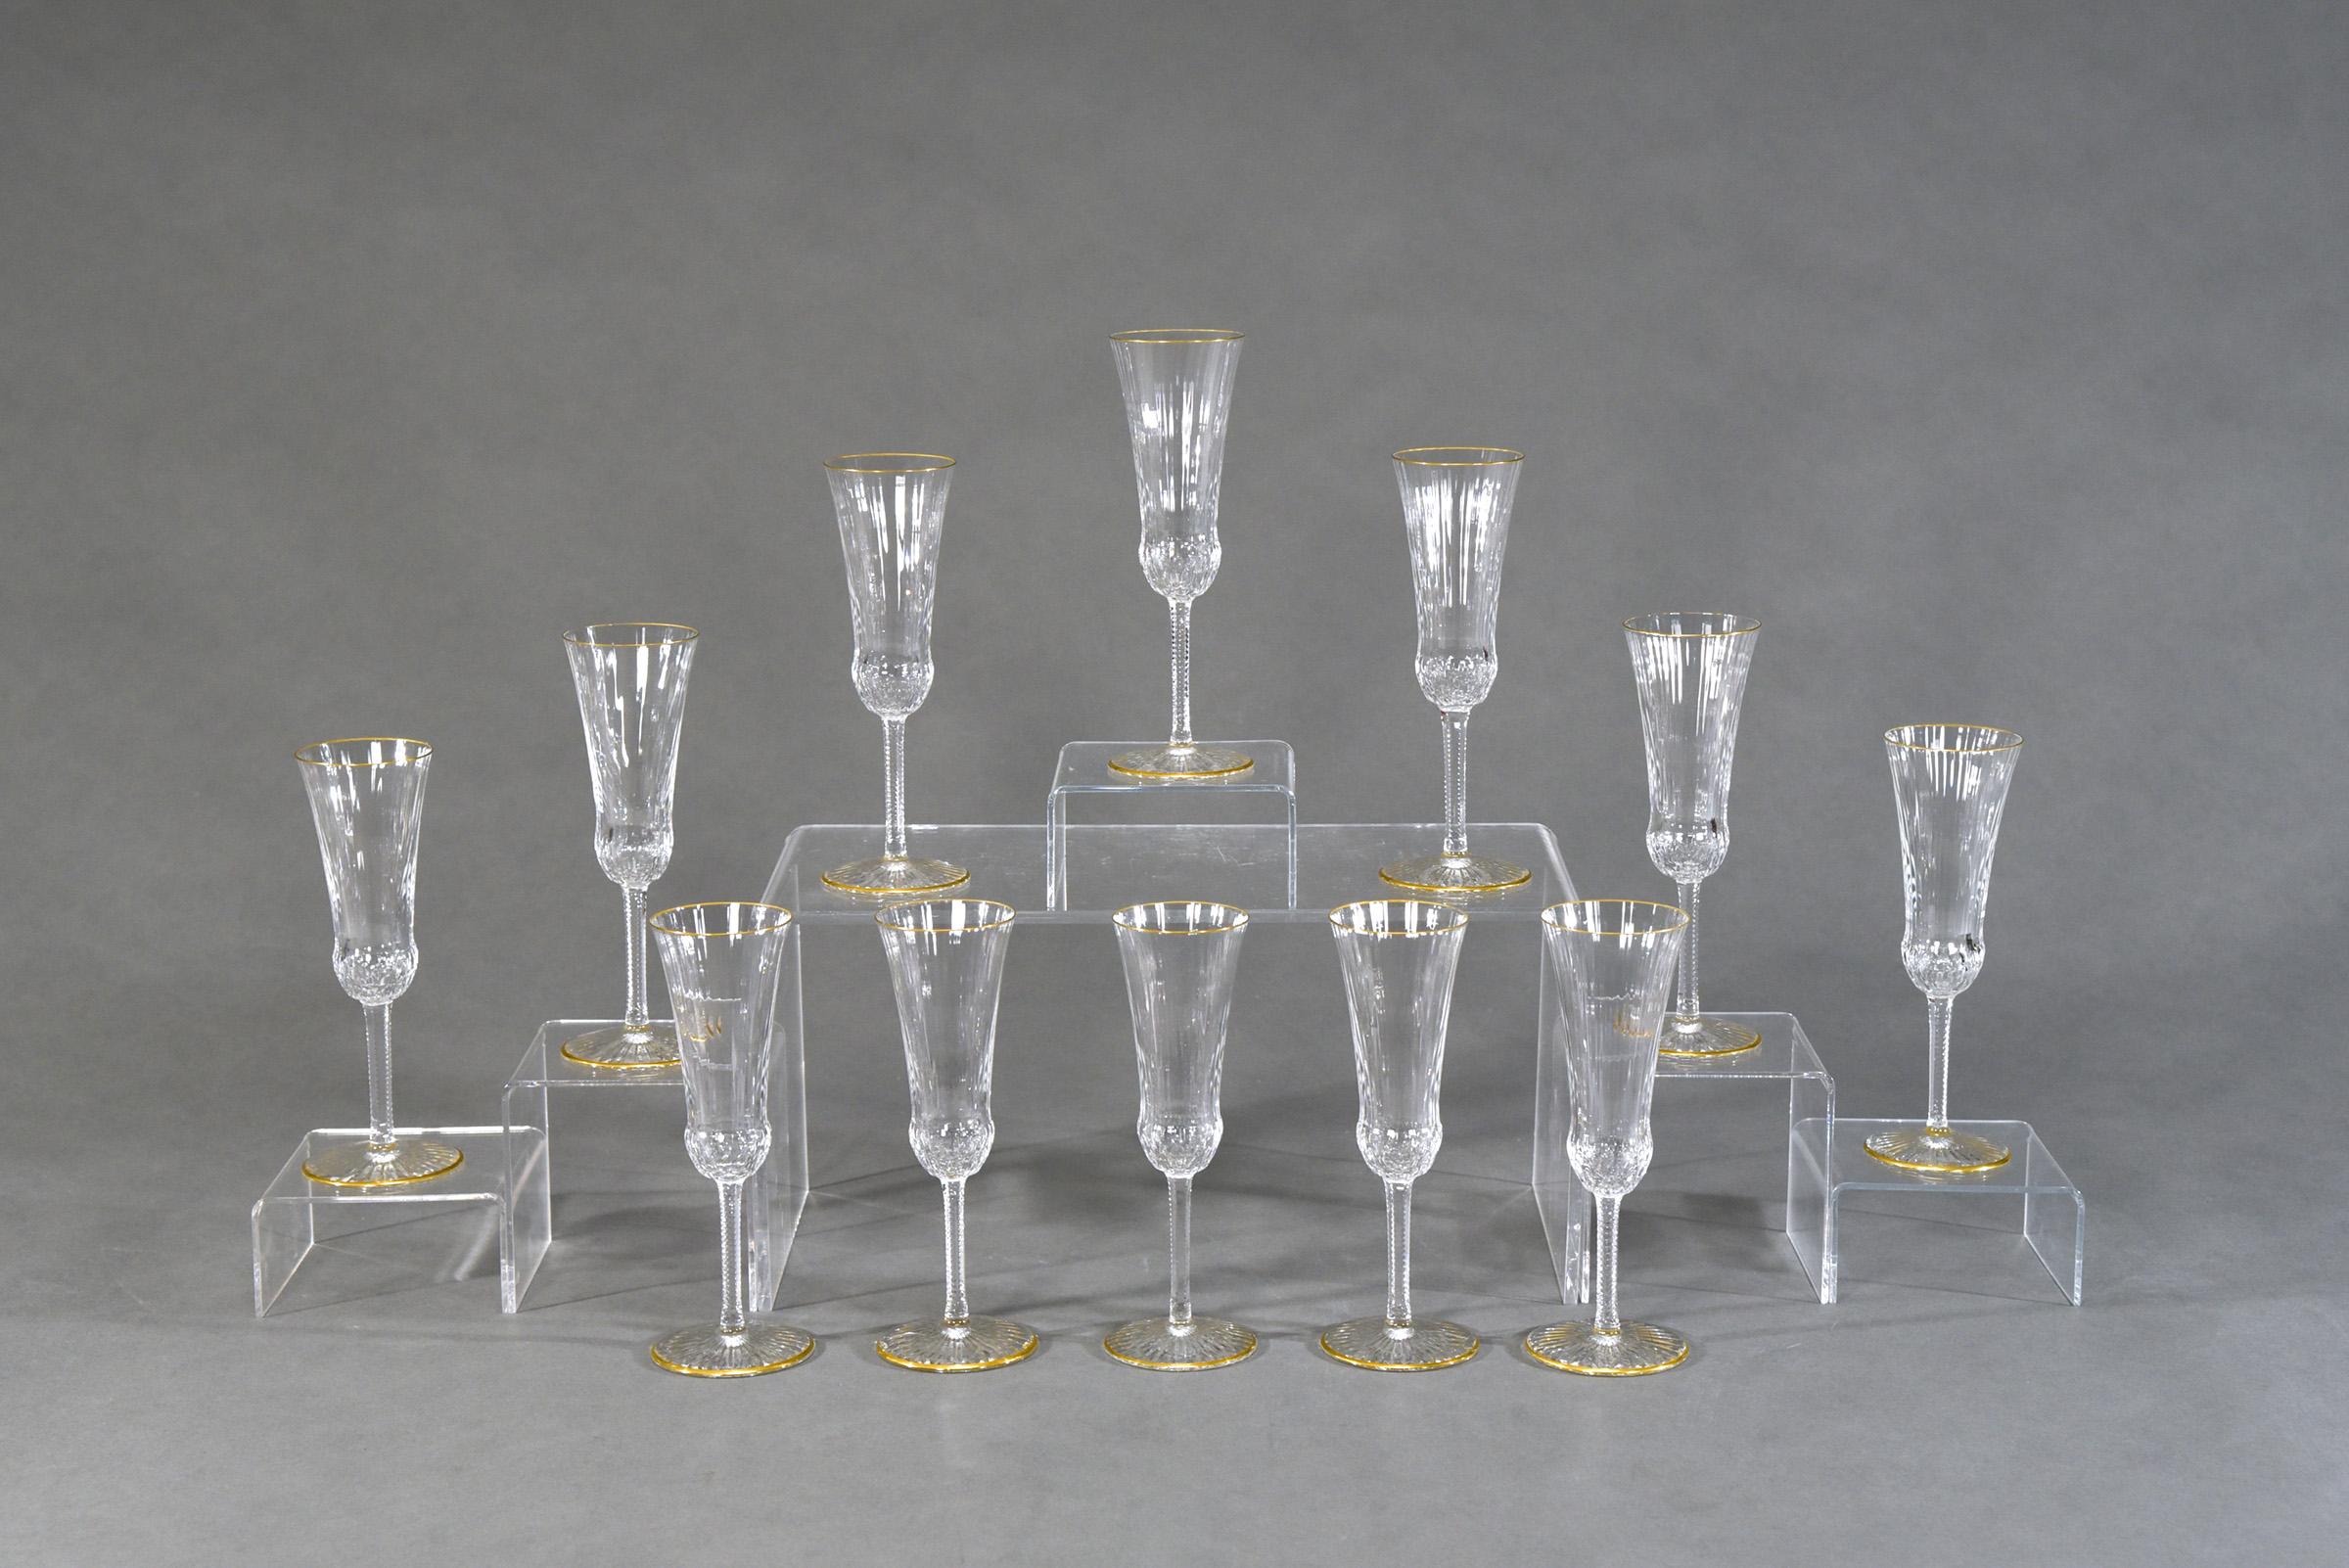 These are the classic, iconic champagne flutes made by St. Louis in a perfect set of 12. Hand blown crystal with optic rib cutting, zipper cut stem and star cut base. The subtle ribbed design is highlighted in gold and these are in excellent